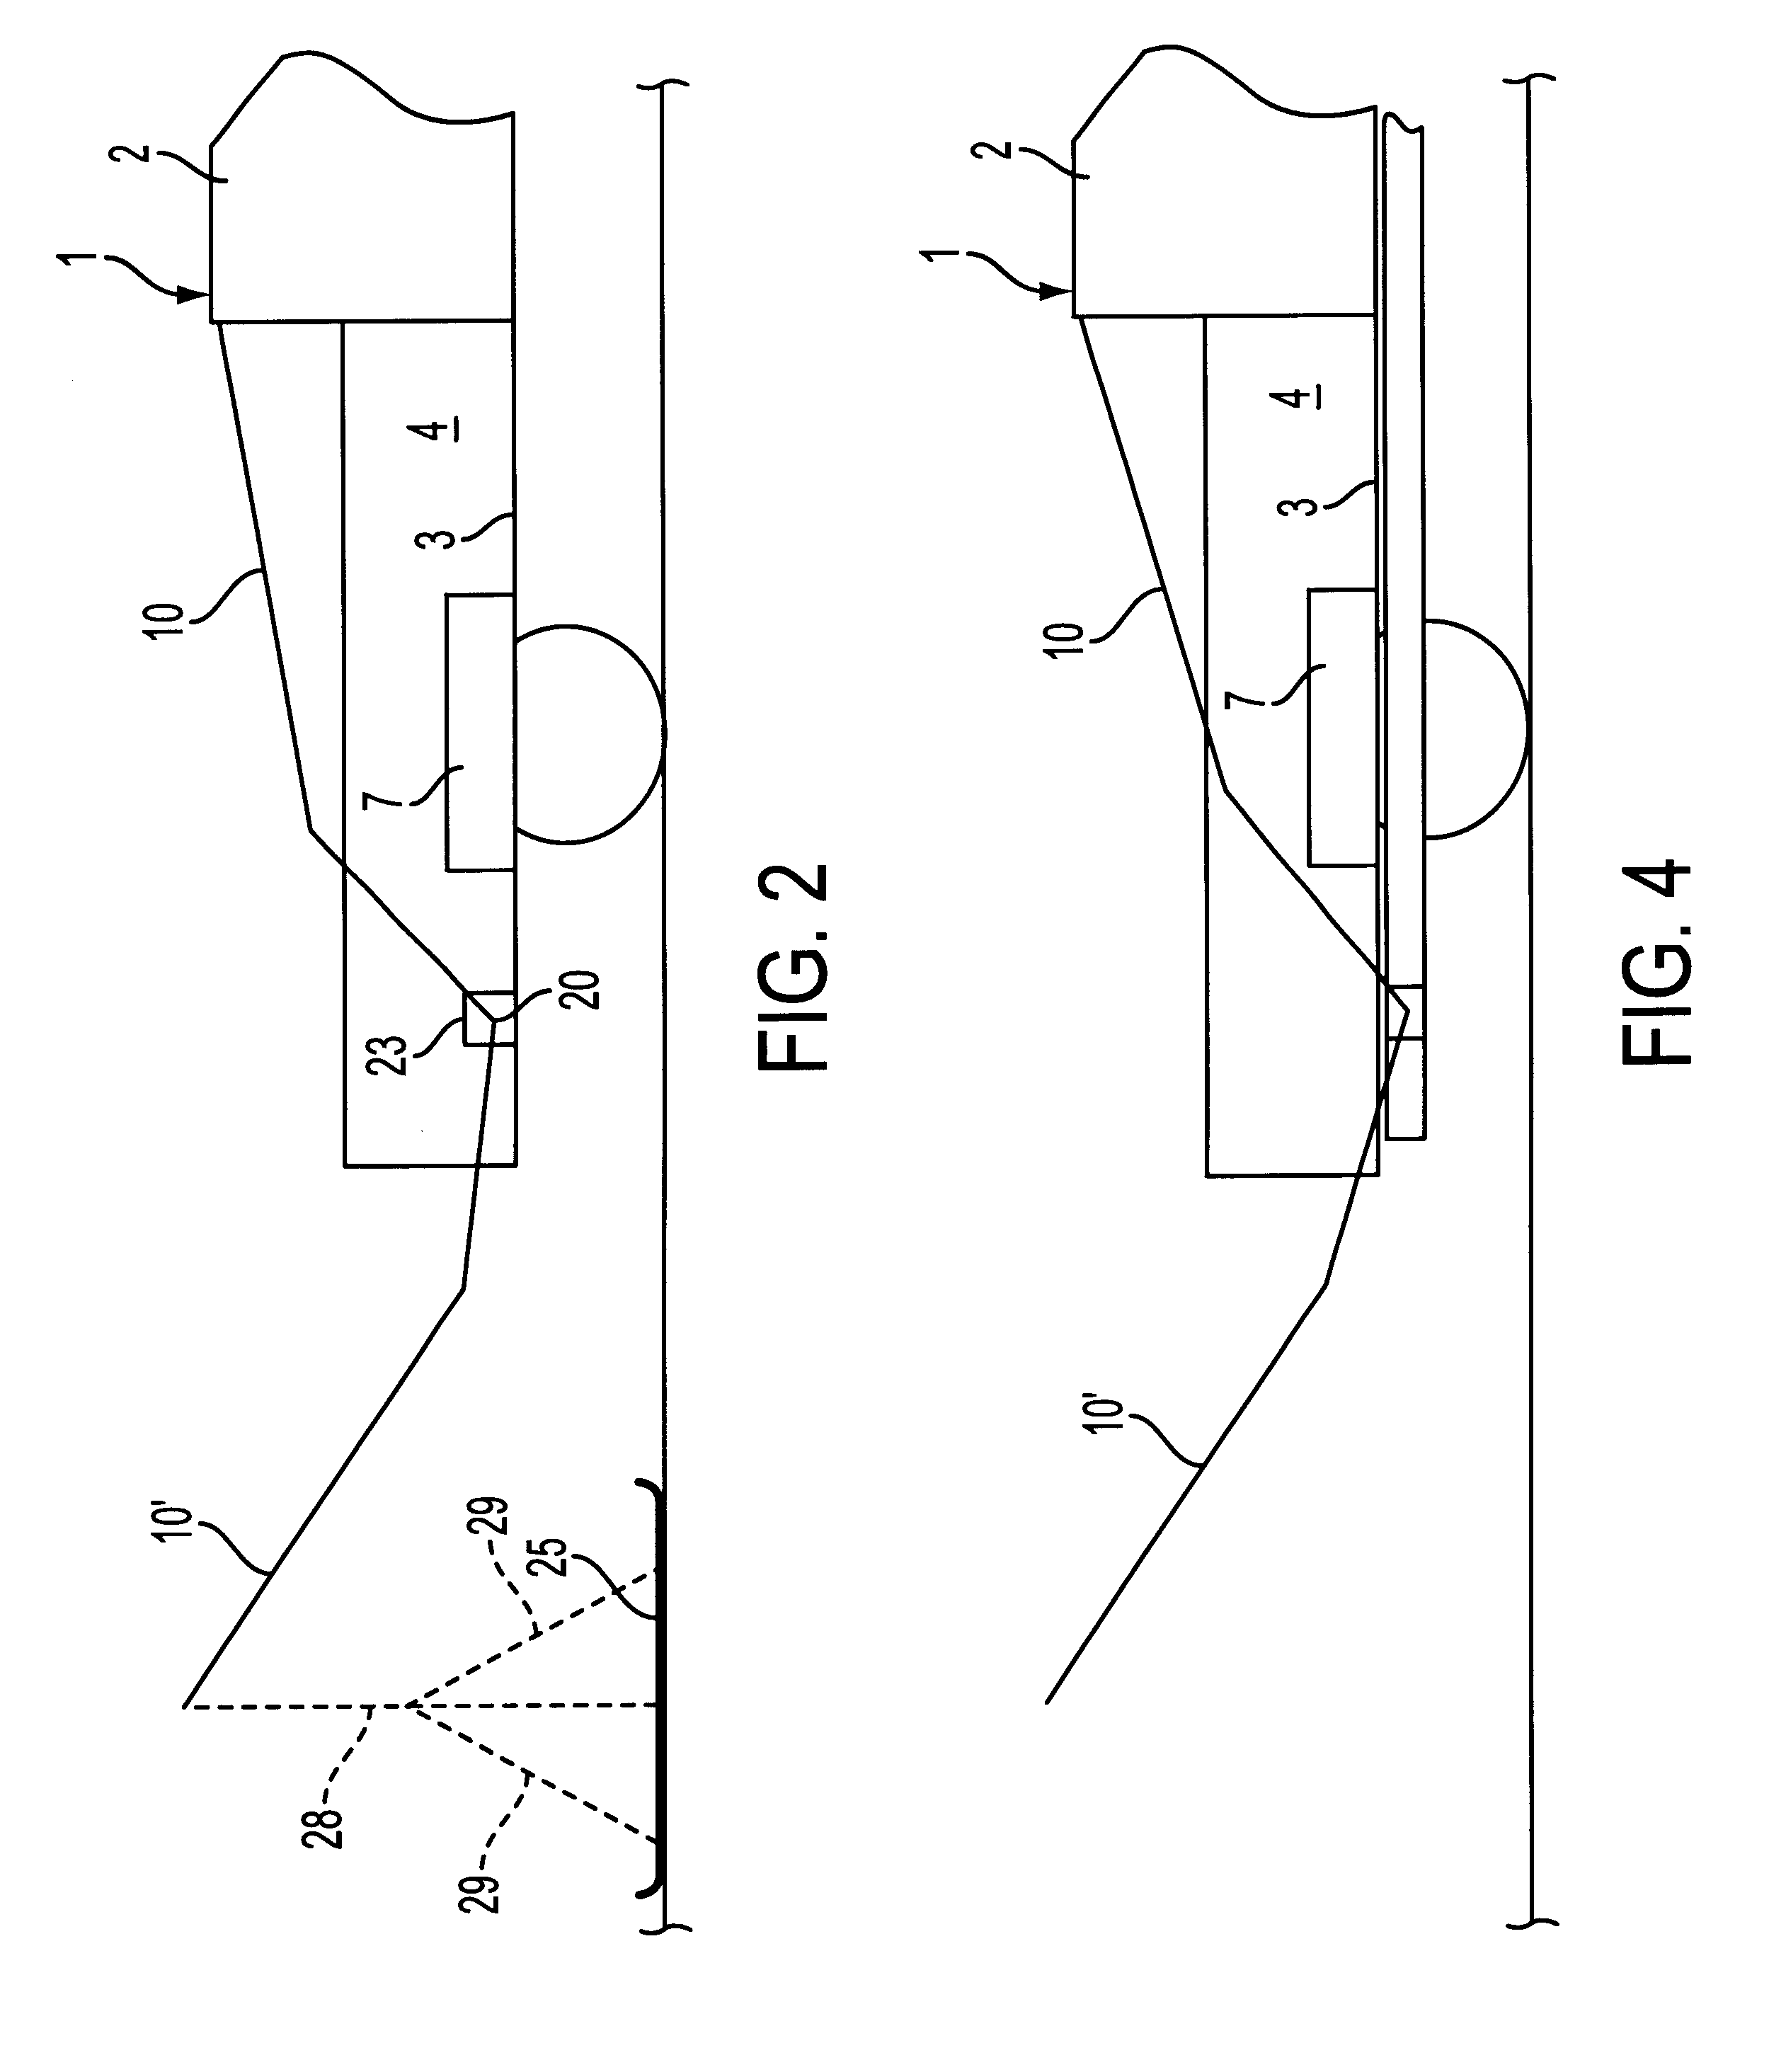 Pick-up vehicle having a swivel device, swivel device, and process for loading and unloading the pick-up vehicle